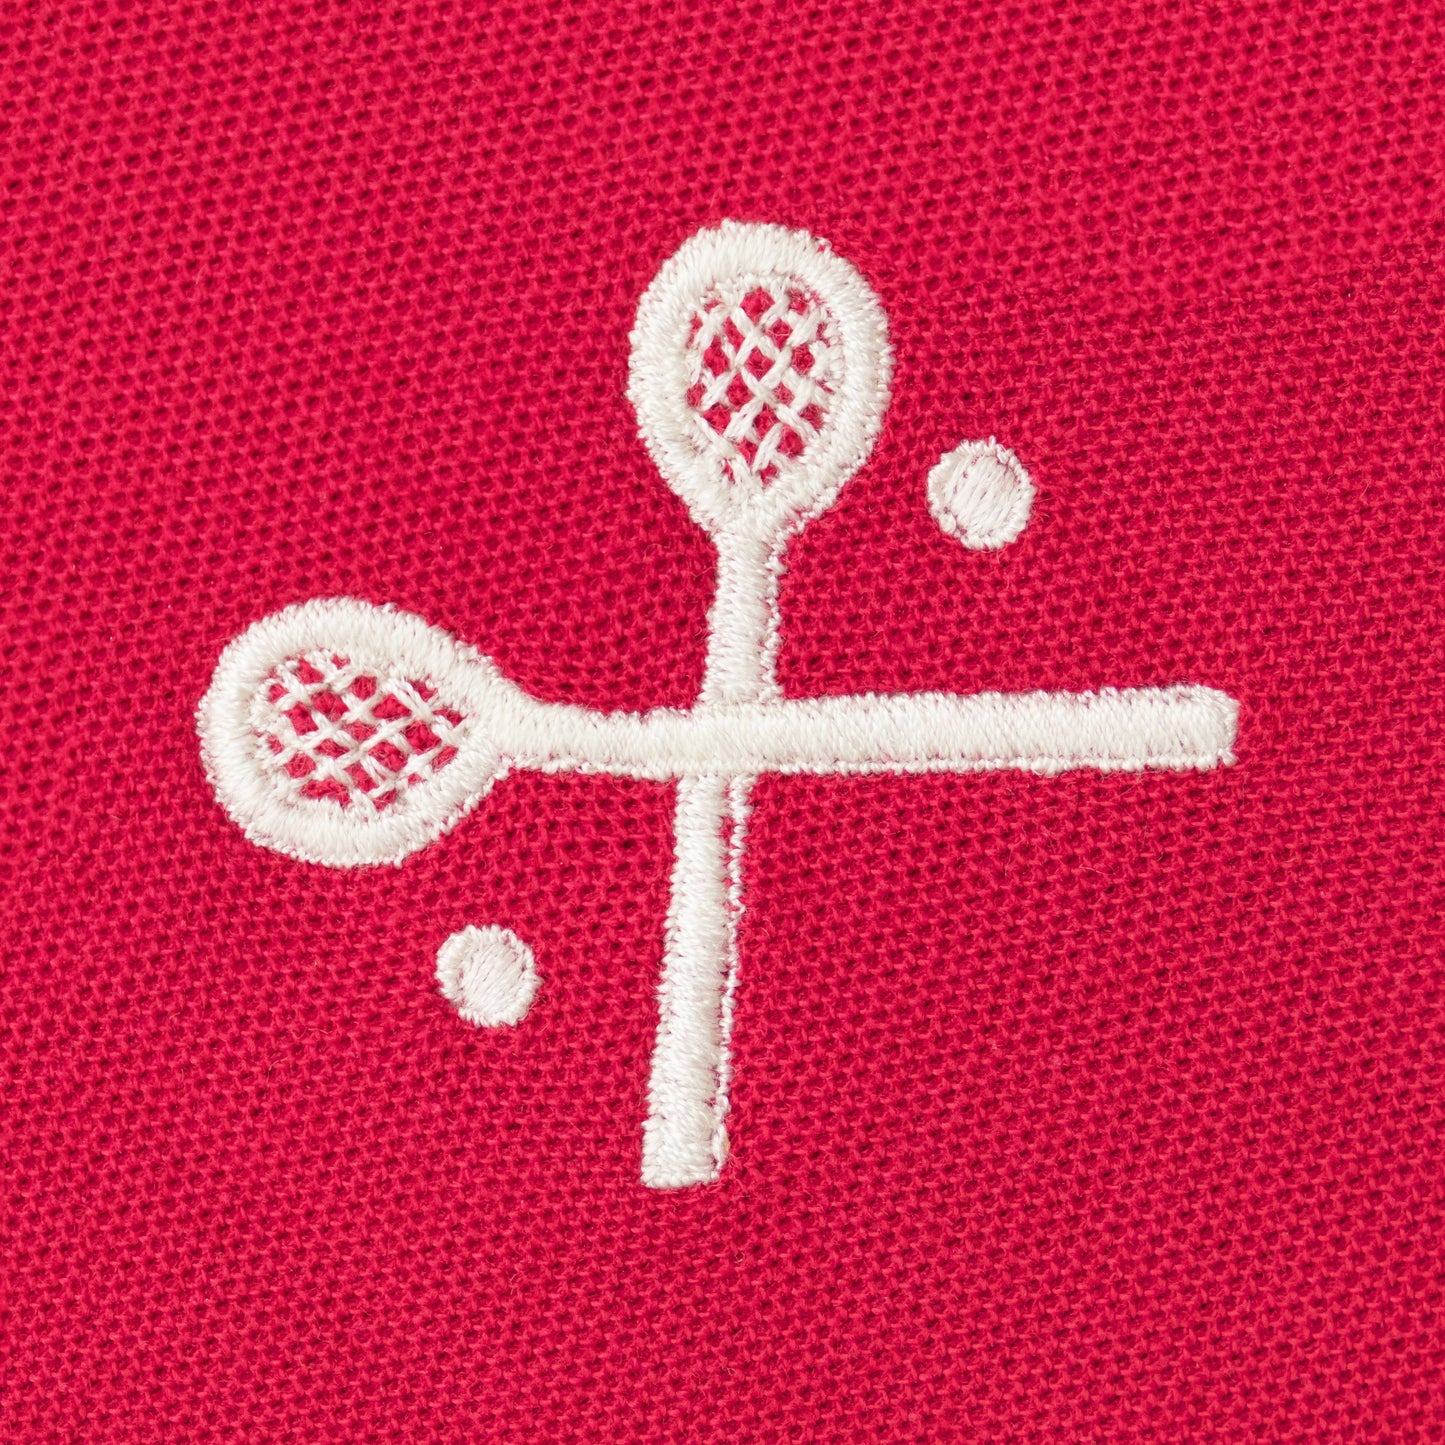 White embroidered crossed racquets motif on red polo.